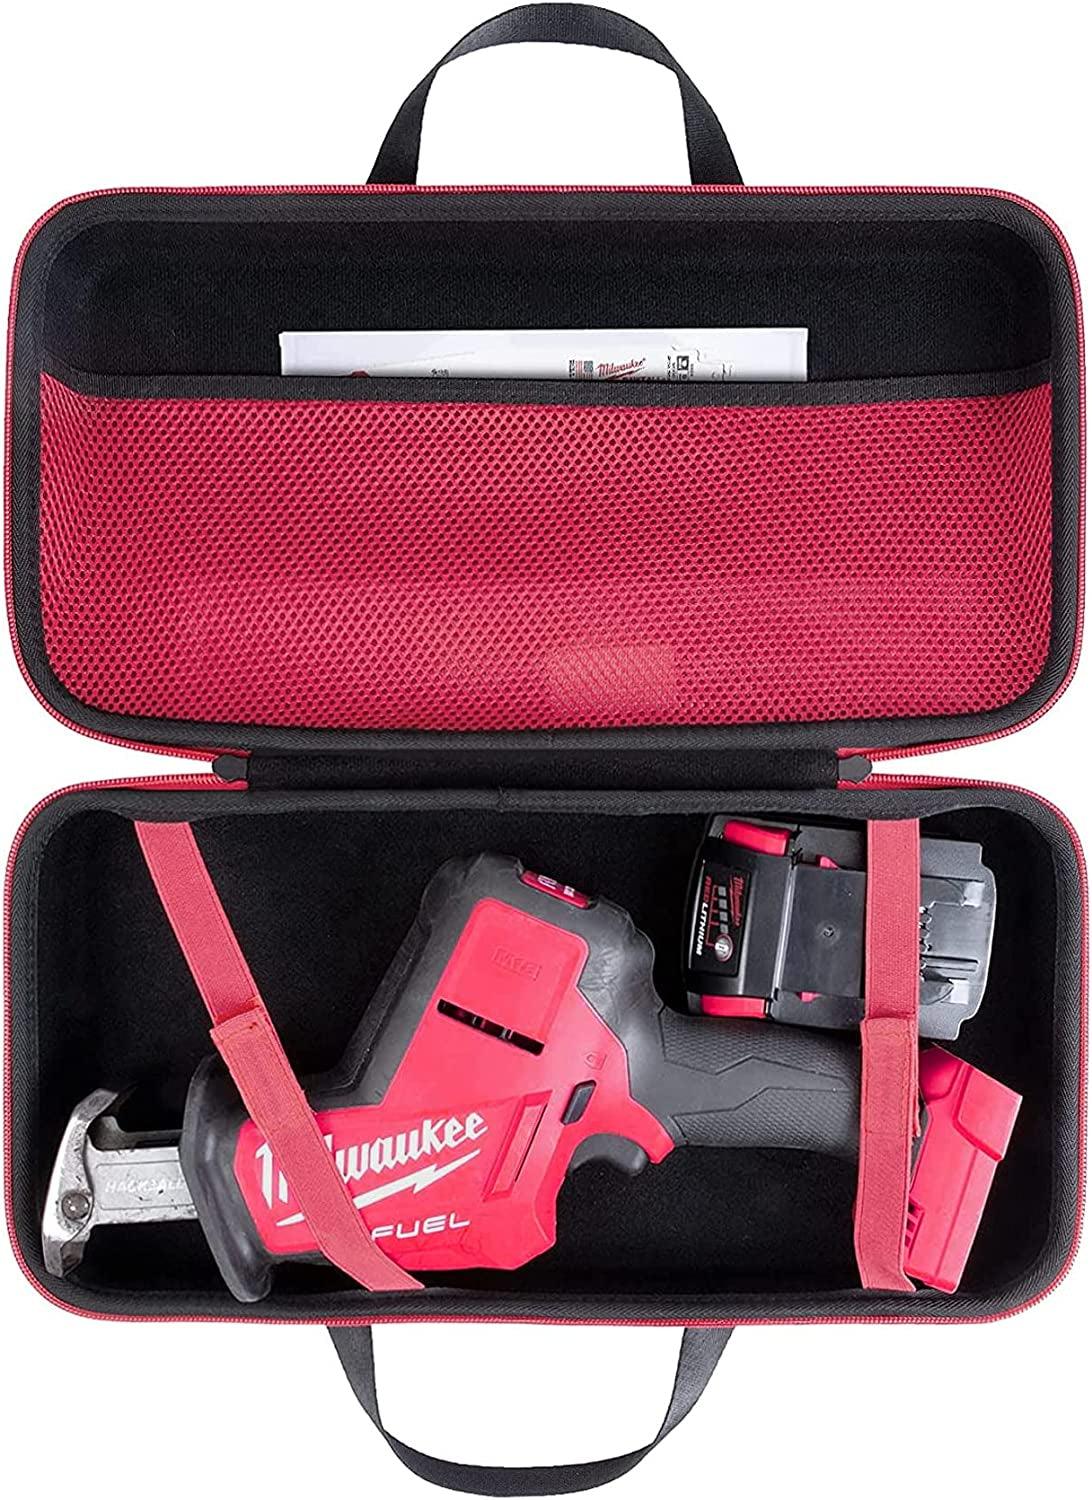 Hard Tool Case Replacement for Milwaukee 2719-20 M18 FUEL Cordless Hackzall Reciprocating Saw